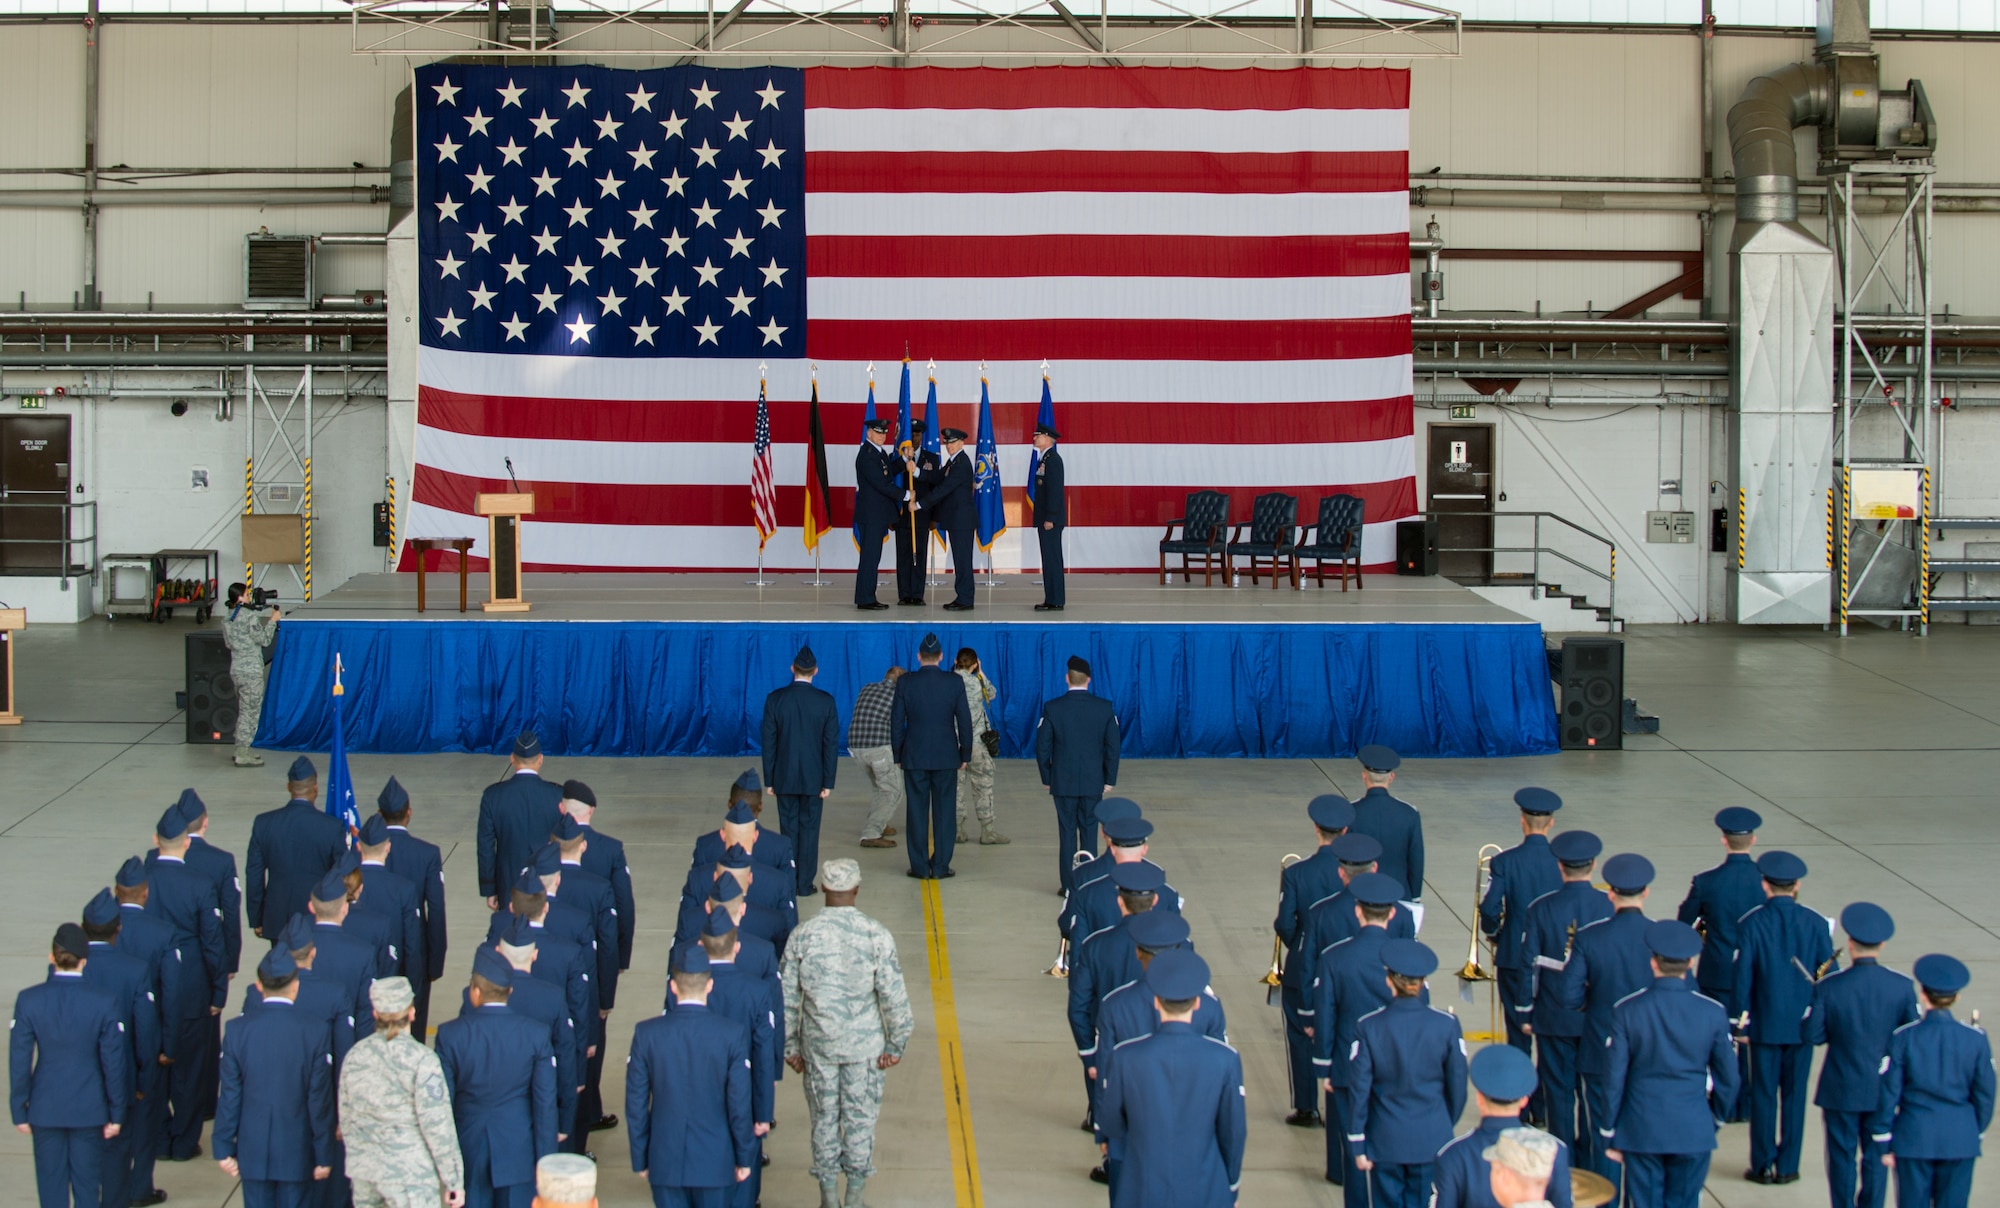 Lt. Gen. Timothy Ray, Third Air Force and 17th Expeditionary Air Force commander, receives the guidon from Gen. Frank Gorenc, U.S. Air Forces in Europe and Air Forces Africa commander July 2, 2015, at Ramstein Air Base.  As the Third Air Force commander, Ray will command and be responsible for forces engaged in contingency and wartime operations in Europe and Africa areas of responsibility. (U.S. Air Force photo/ Staff Sgt. Armando A. Schwier-Morales)